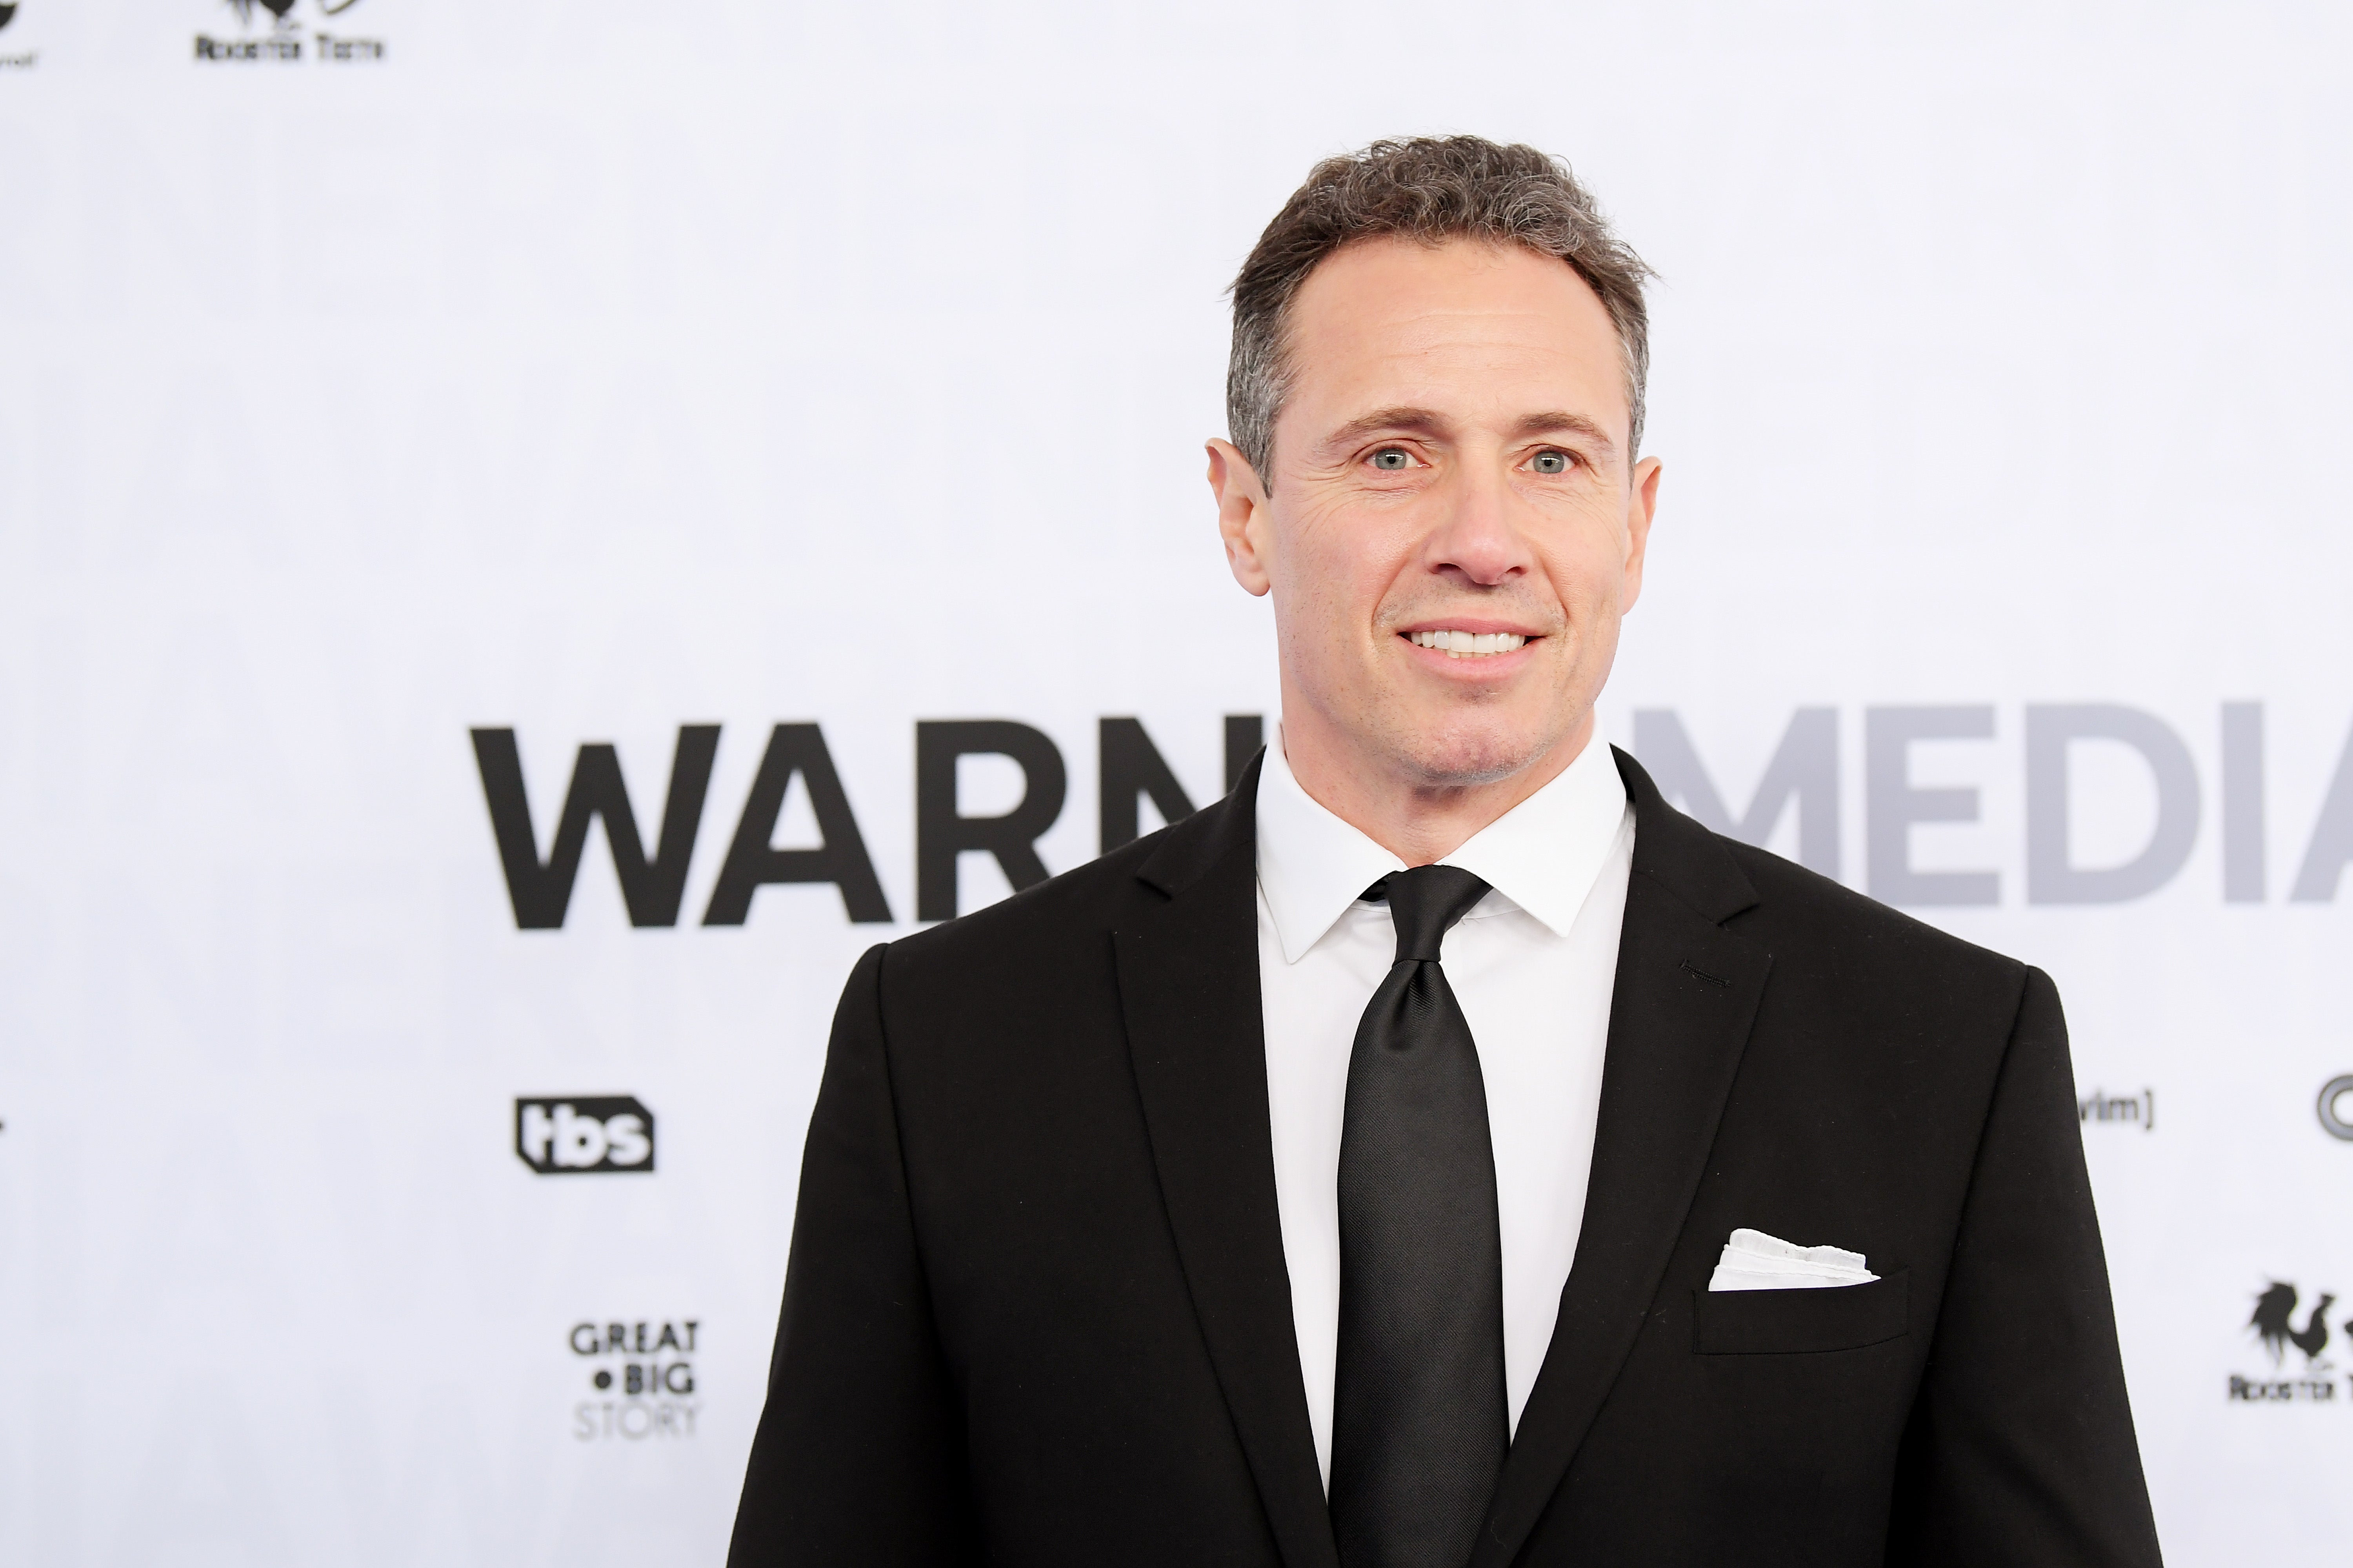 File: The additional transcripts and video testimonies released by the NY Attorney General reveal the extent to which CNN host Chris Cuomo aided his brother, Andrew Cuomo at the peak of sexual misconduct scandal